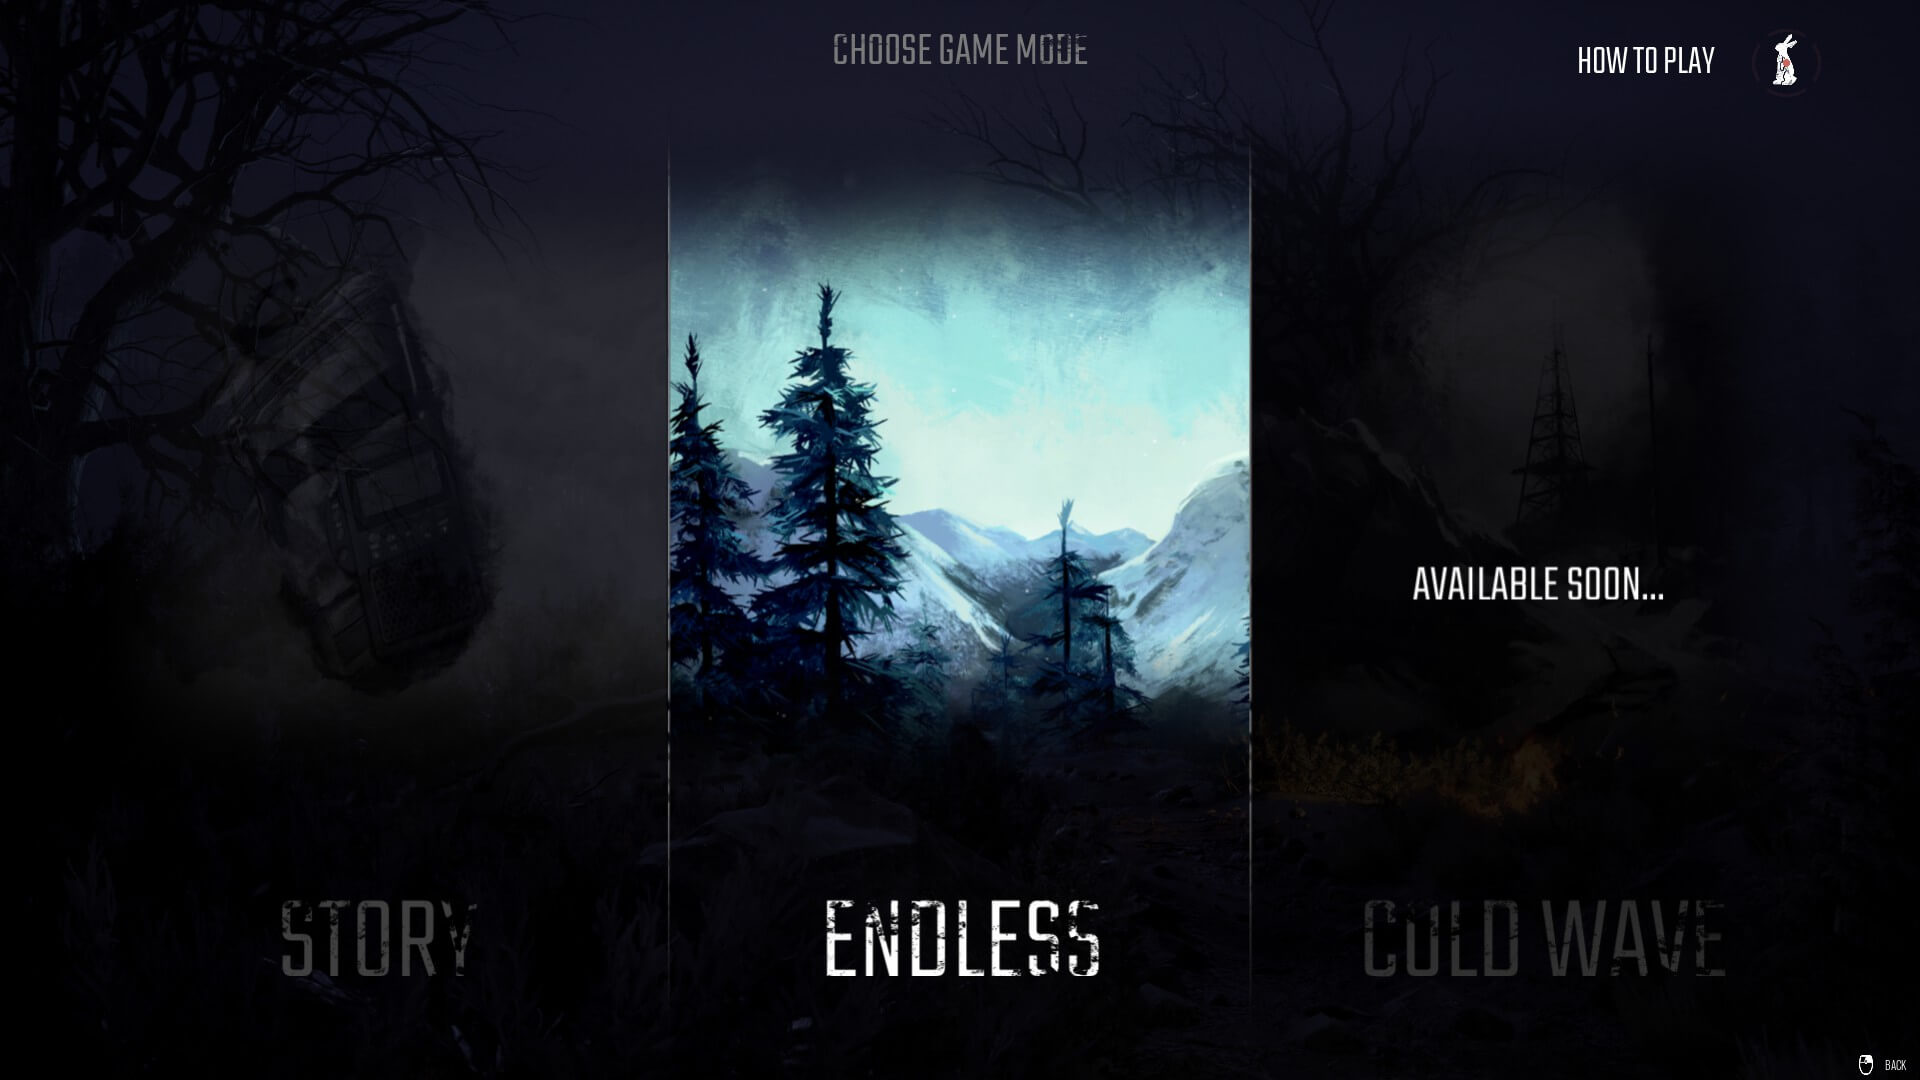 The menu with the three modes found in-game. They each have an image but the centre one is highlighted. The far right is not out and currently says "available soon".